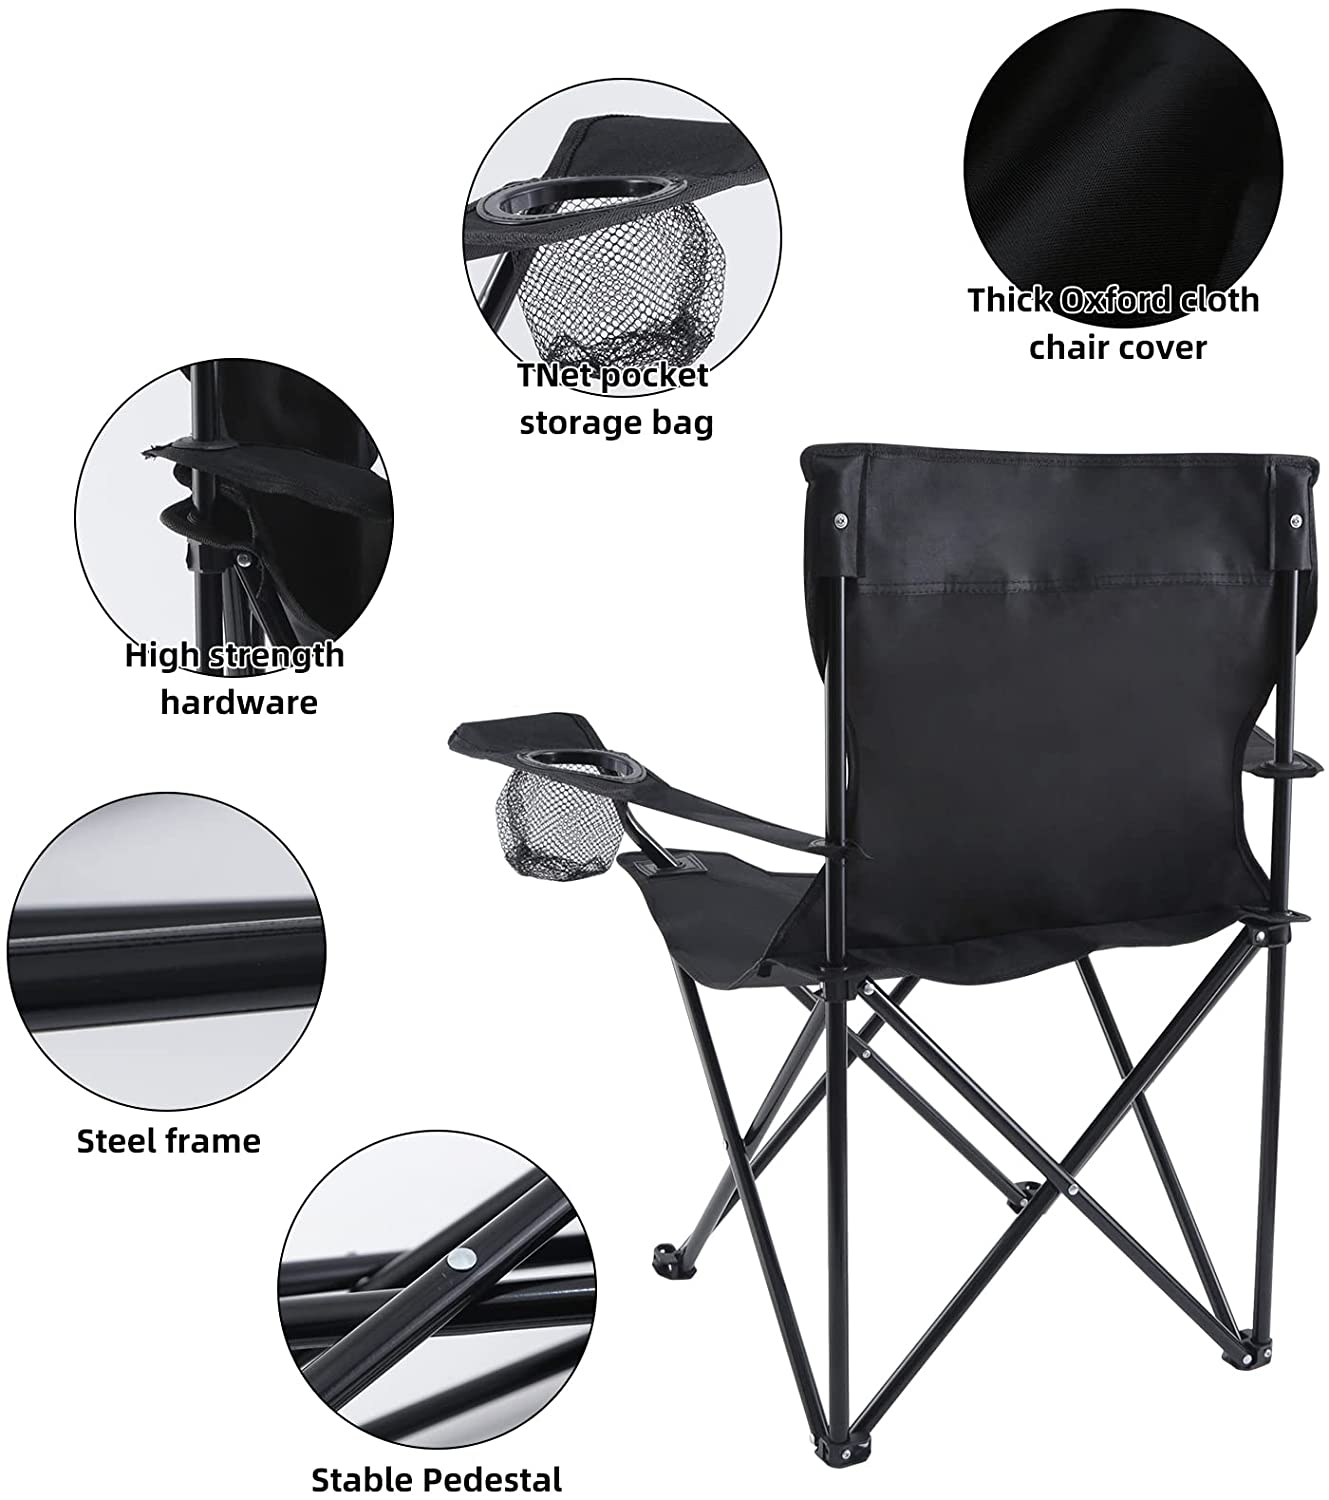 Portable Folding Black Camping Chair, Large